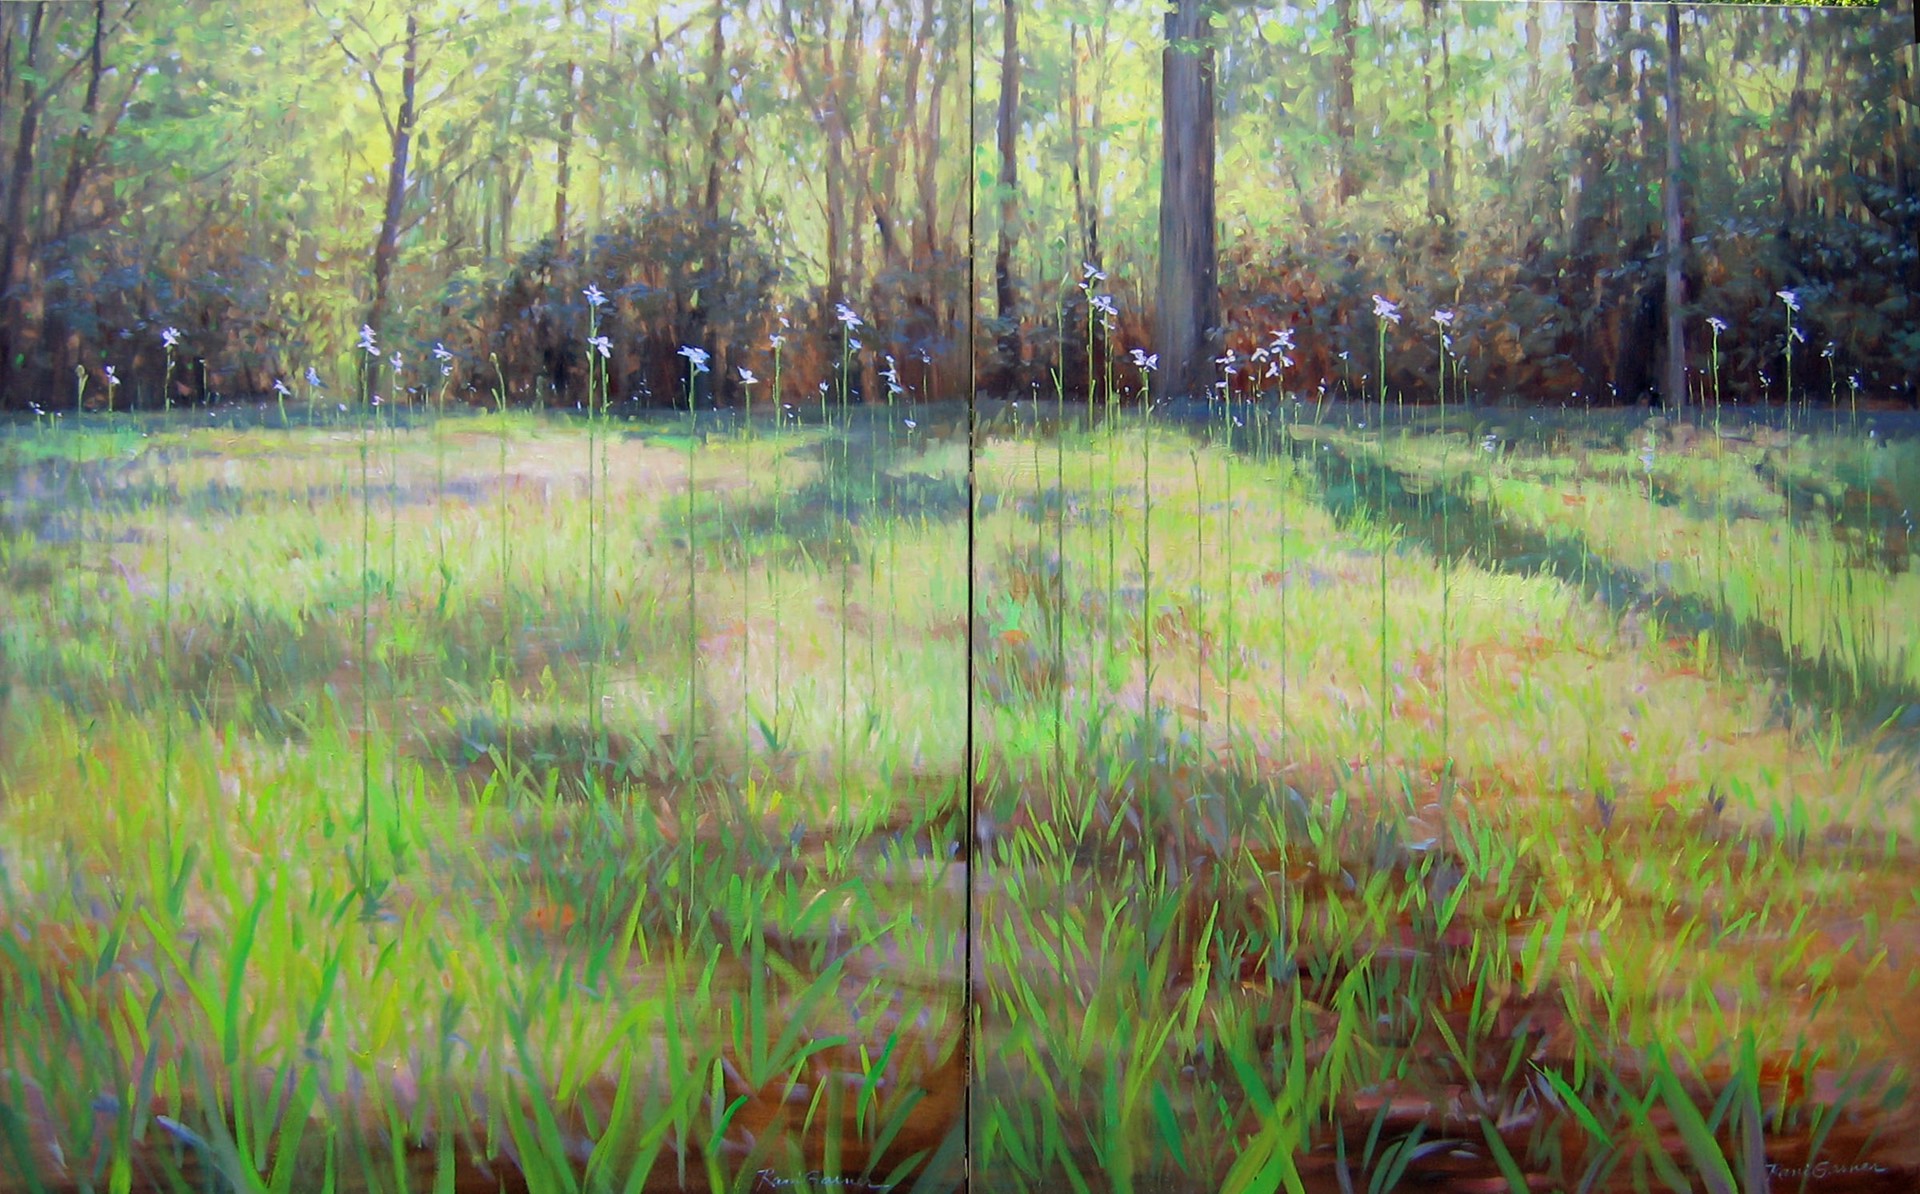 Signature Leaves of Grass Diptych by Rani Garner